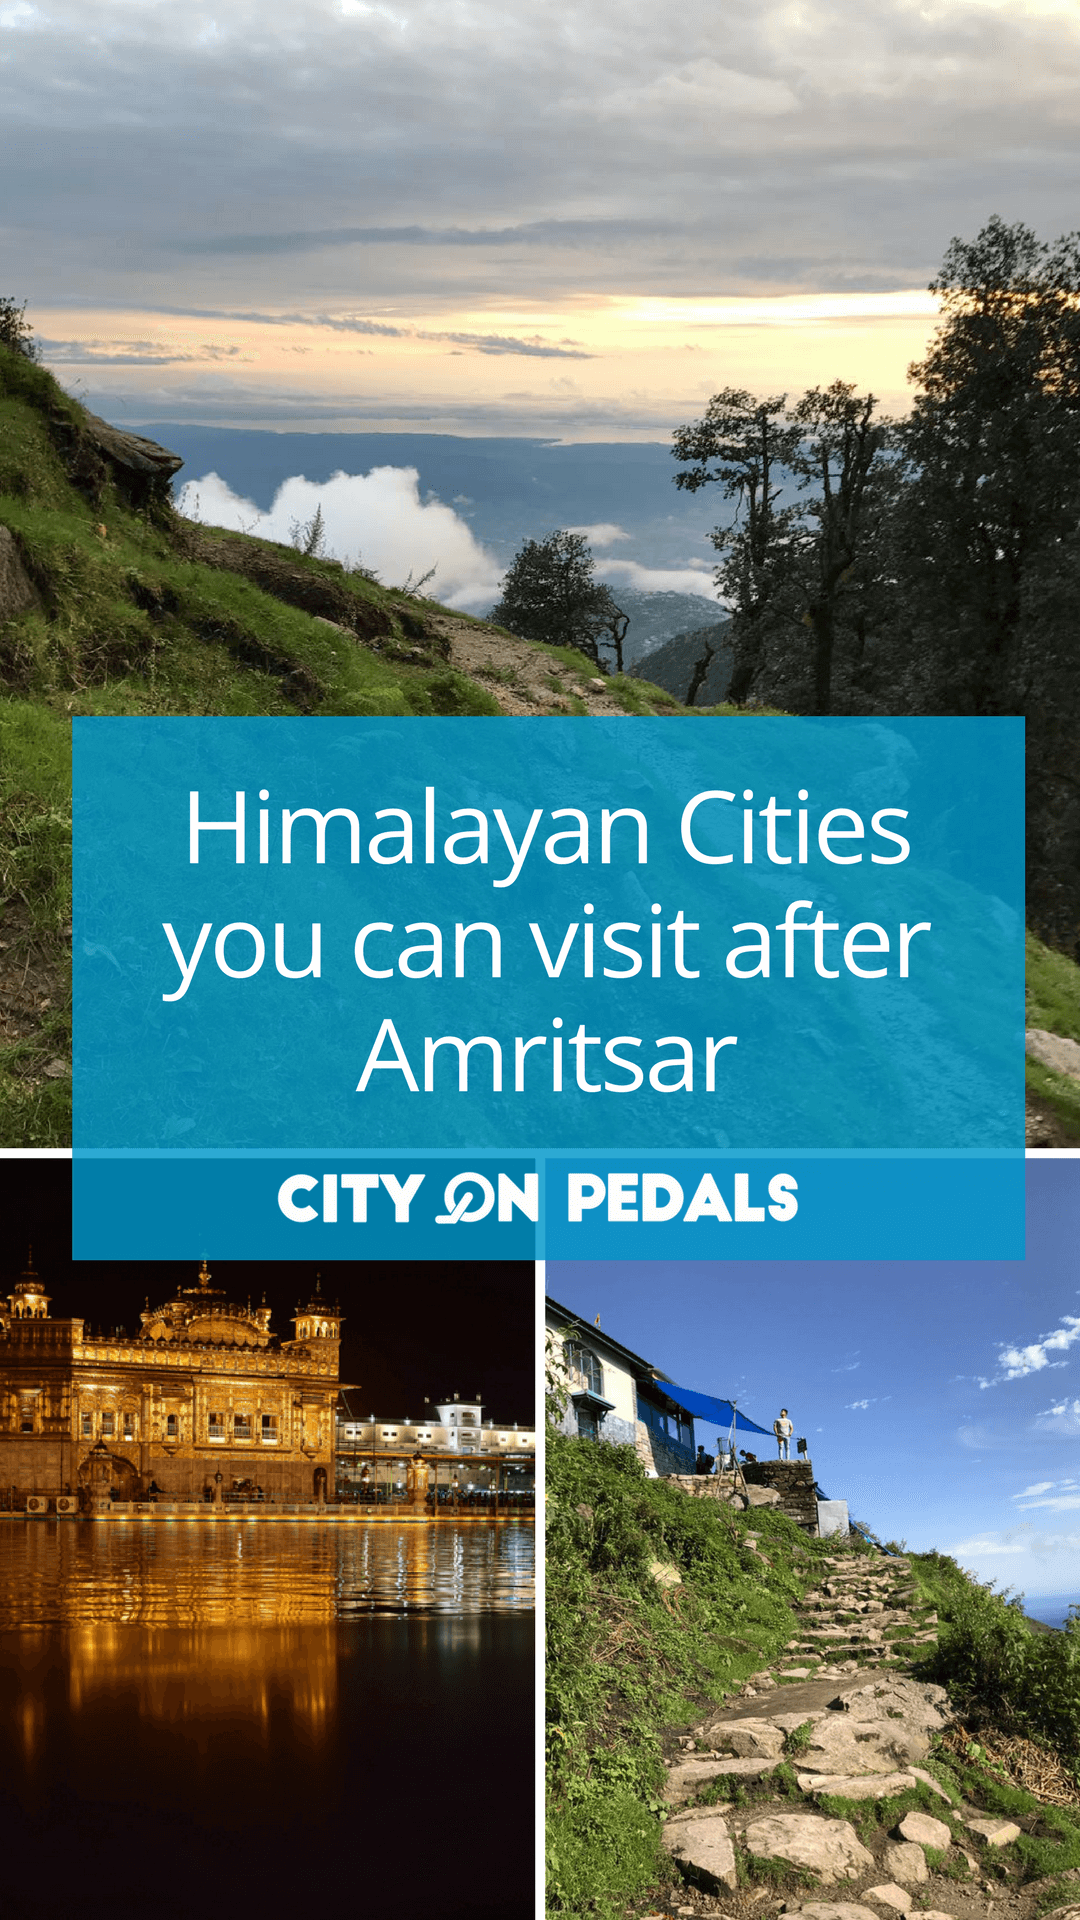 Himachal cities you can visit after Amritsar